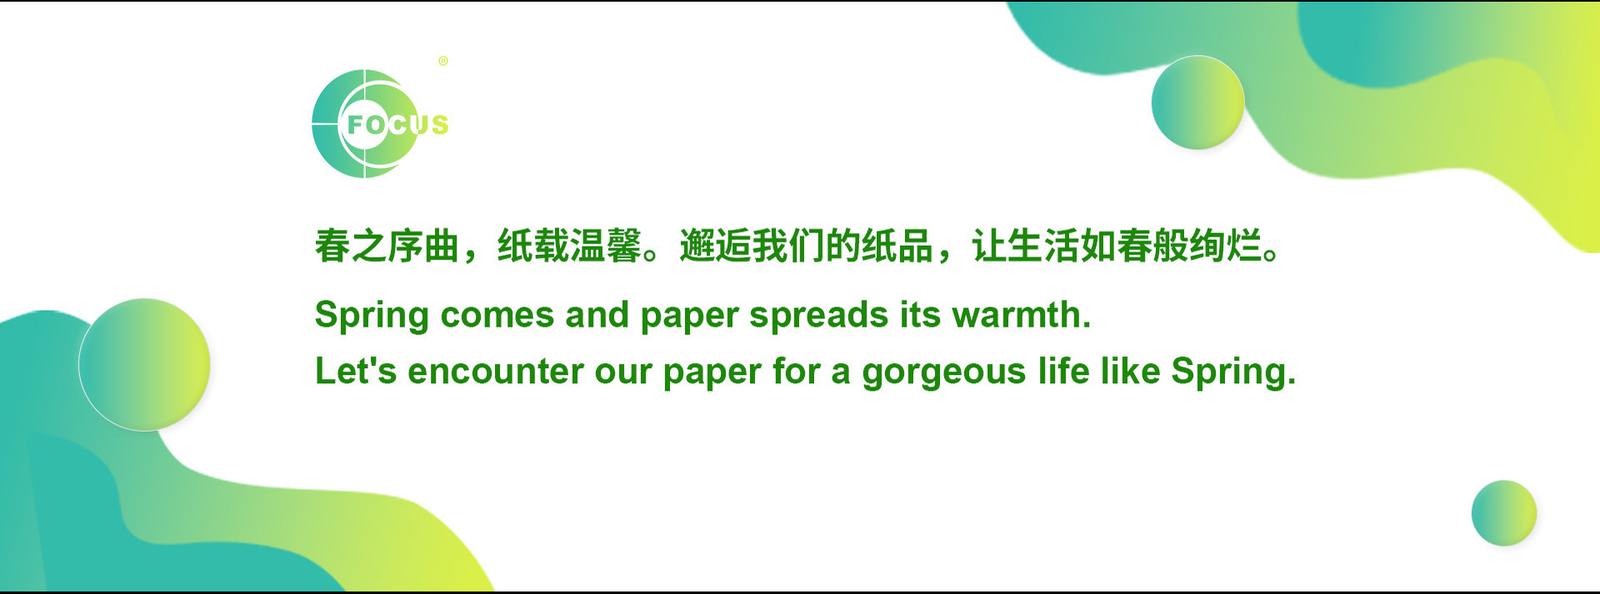 quality Jumbo Thermal Paper Roll factory